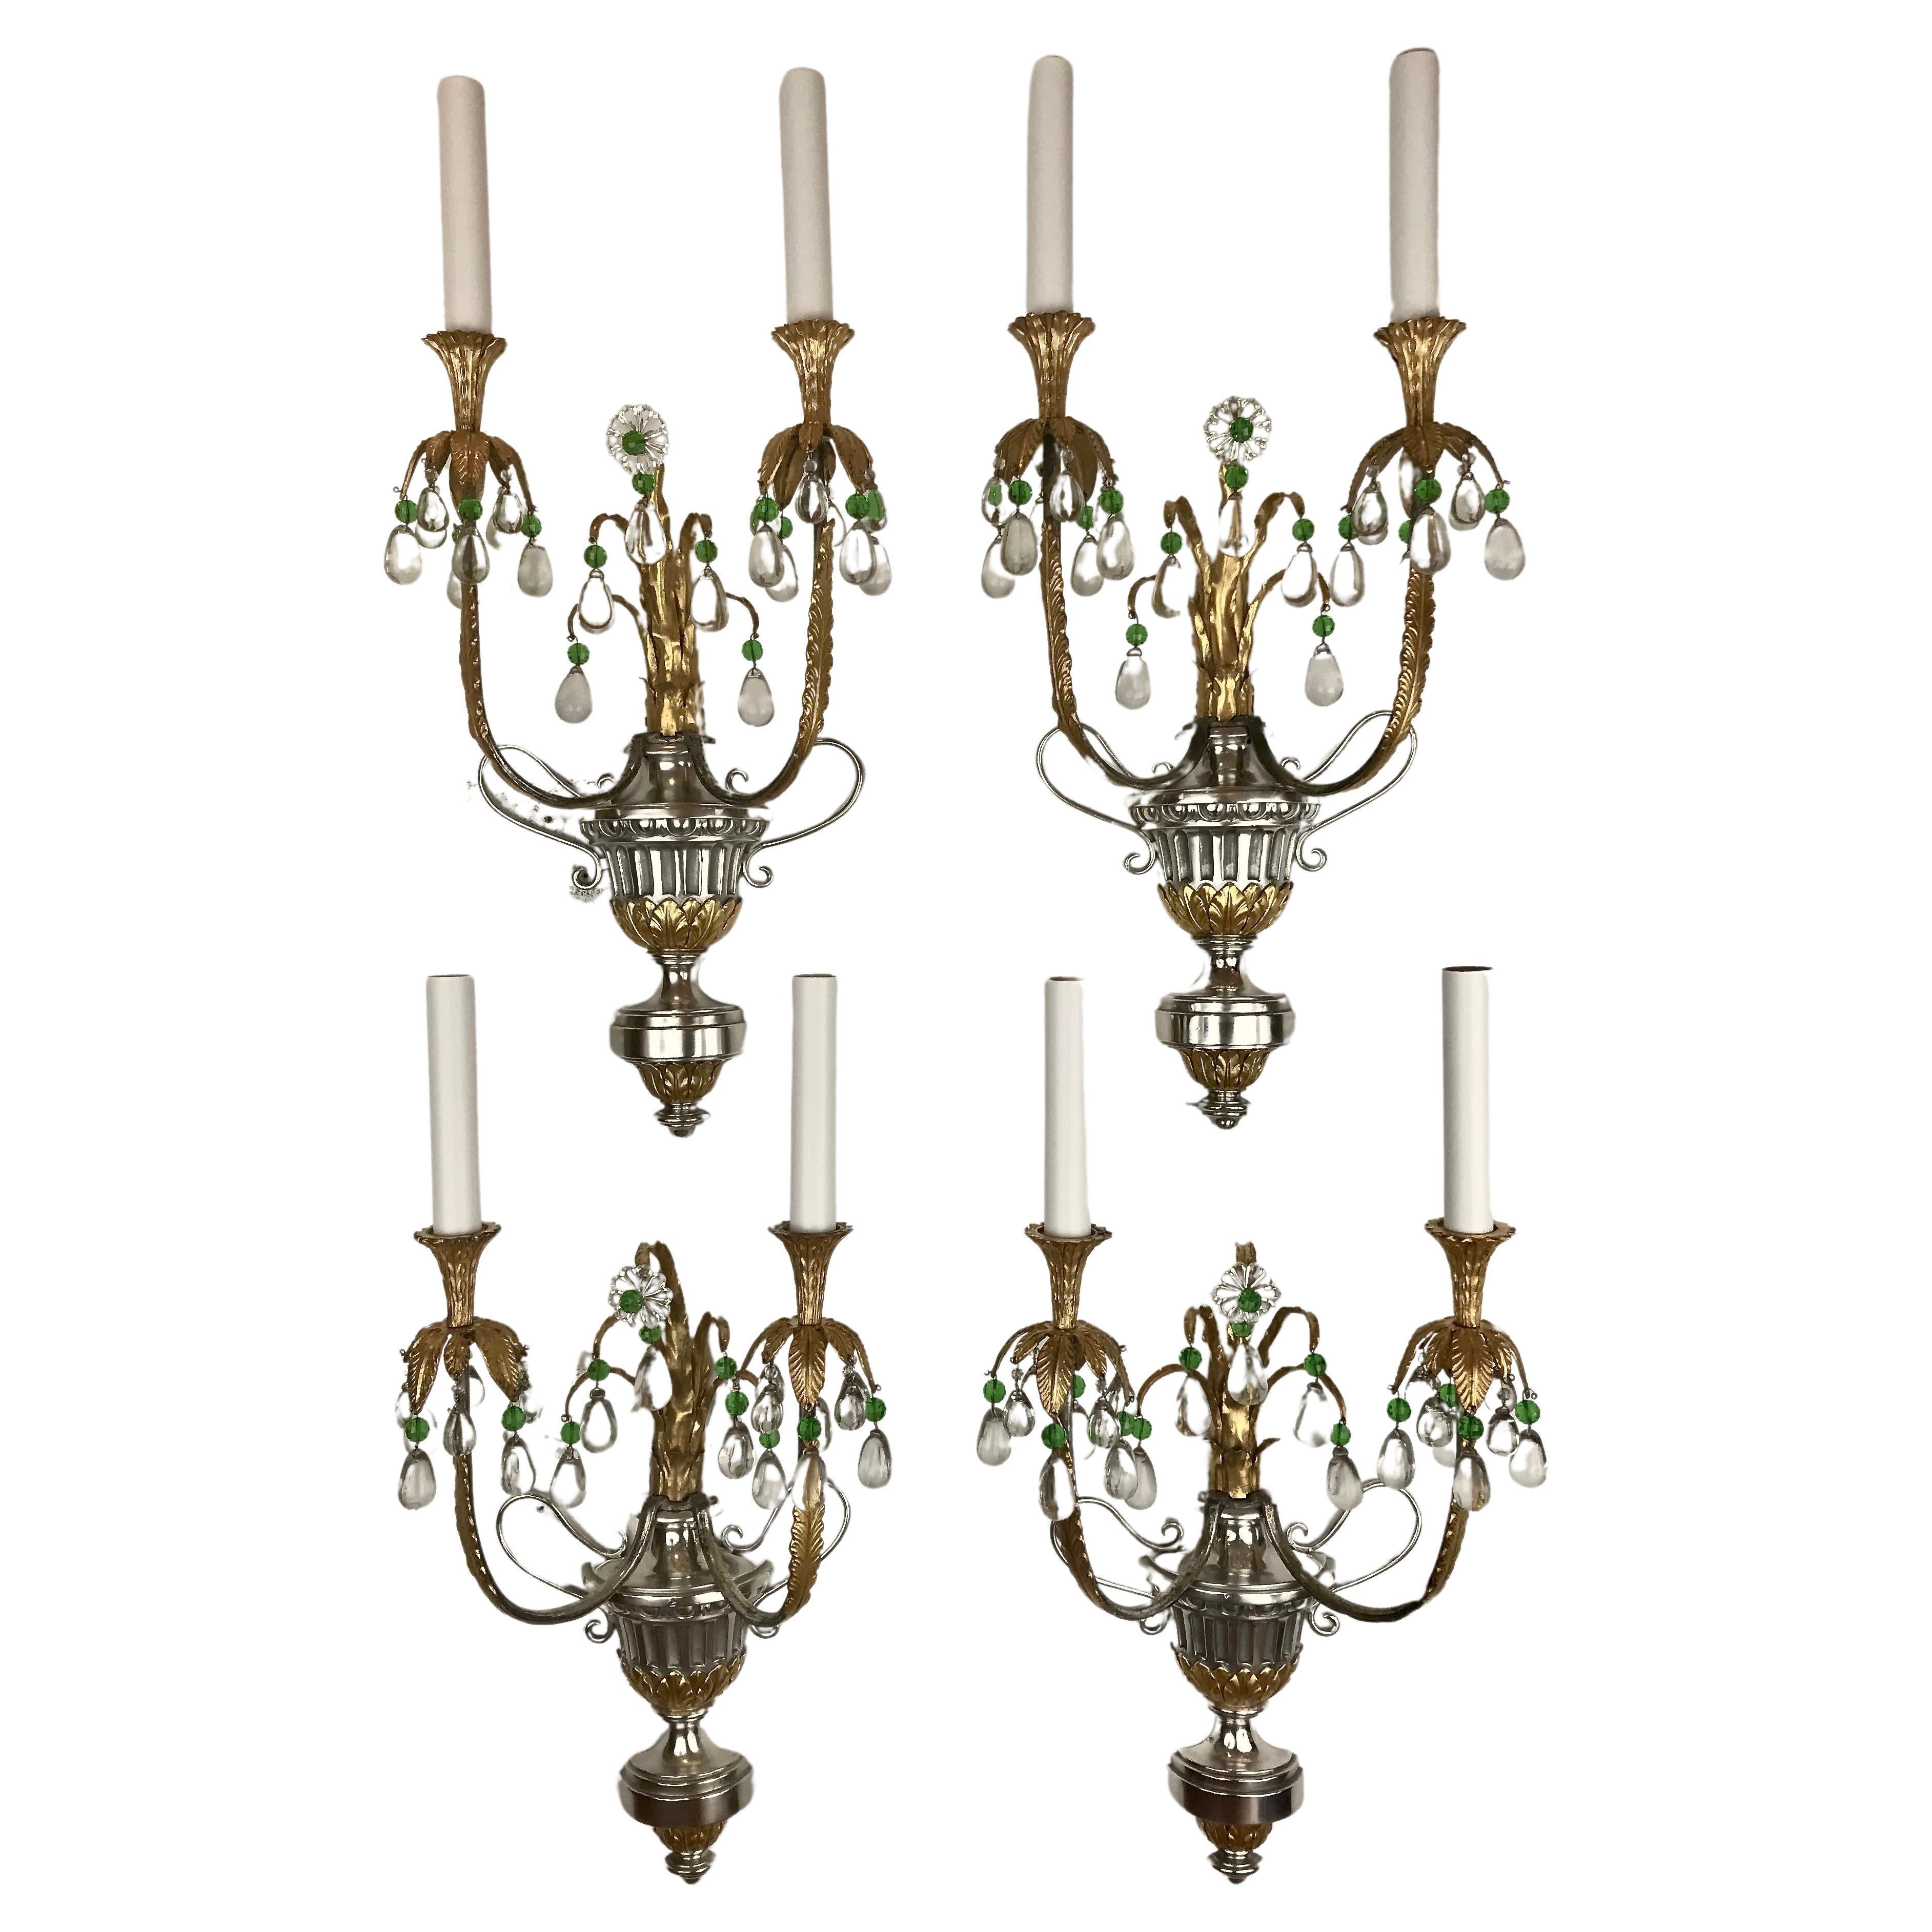  Four Silver and Gilt Bronze Sconces with Green Crystal Accents by Caldwell For Sale